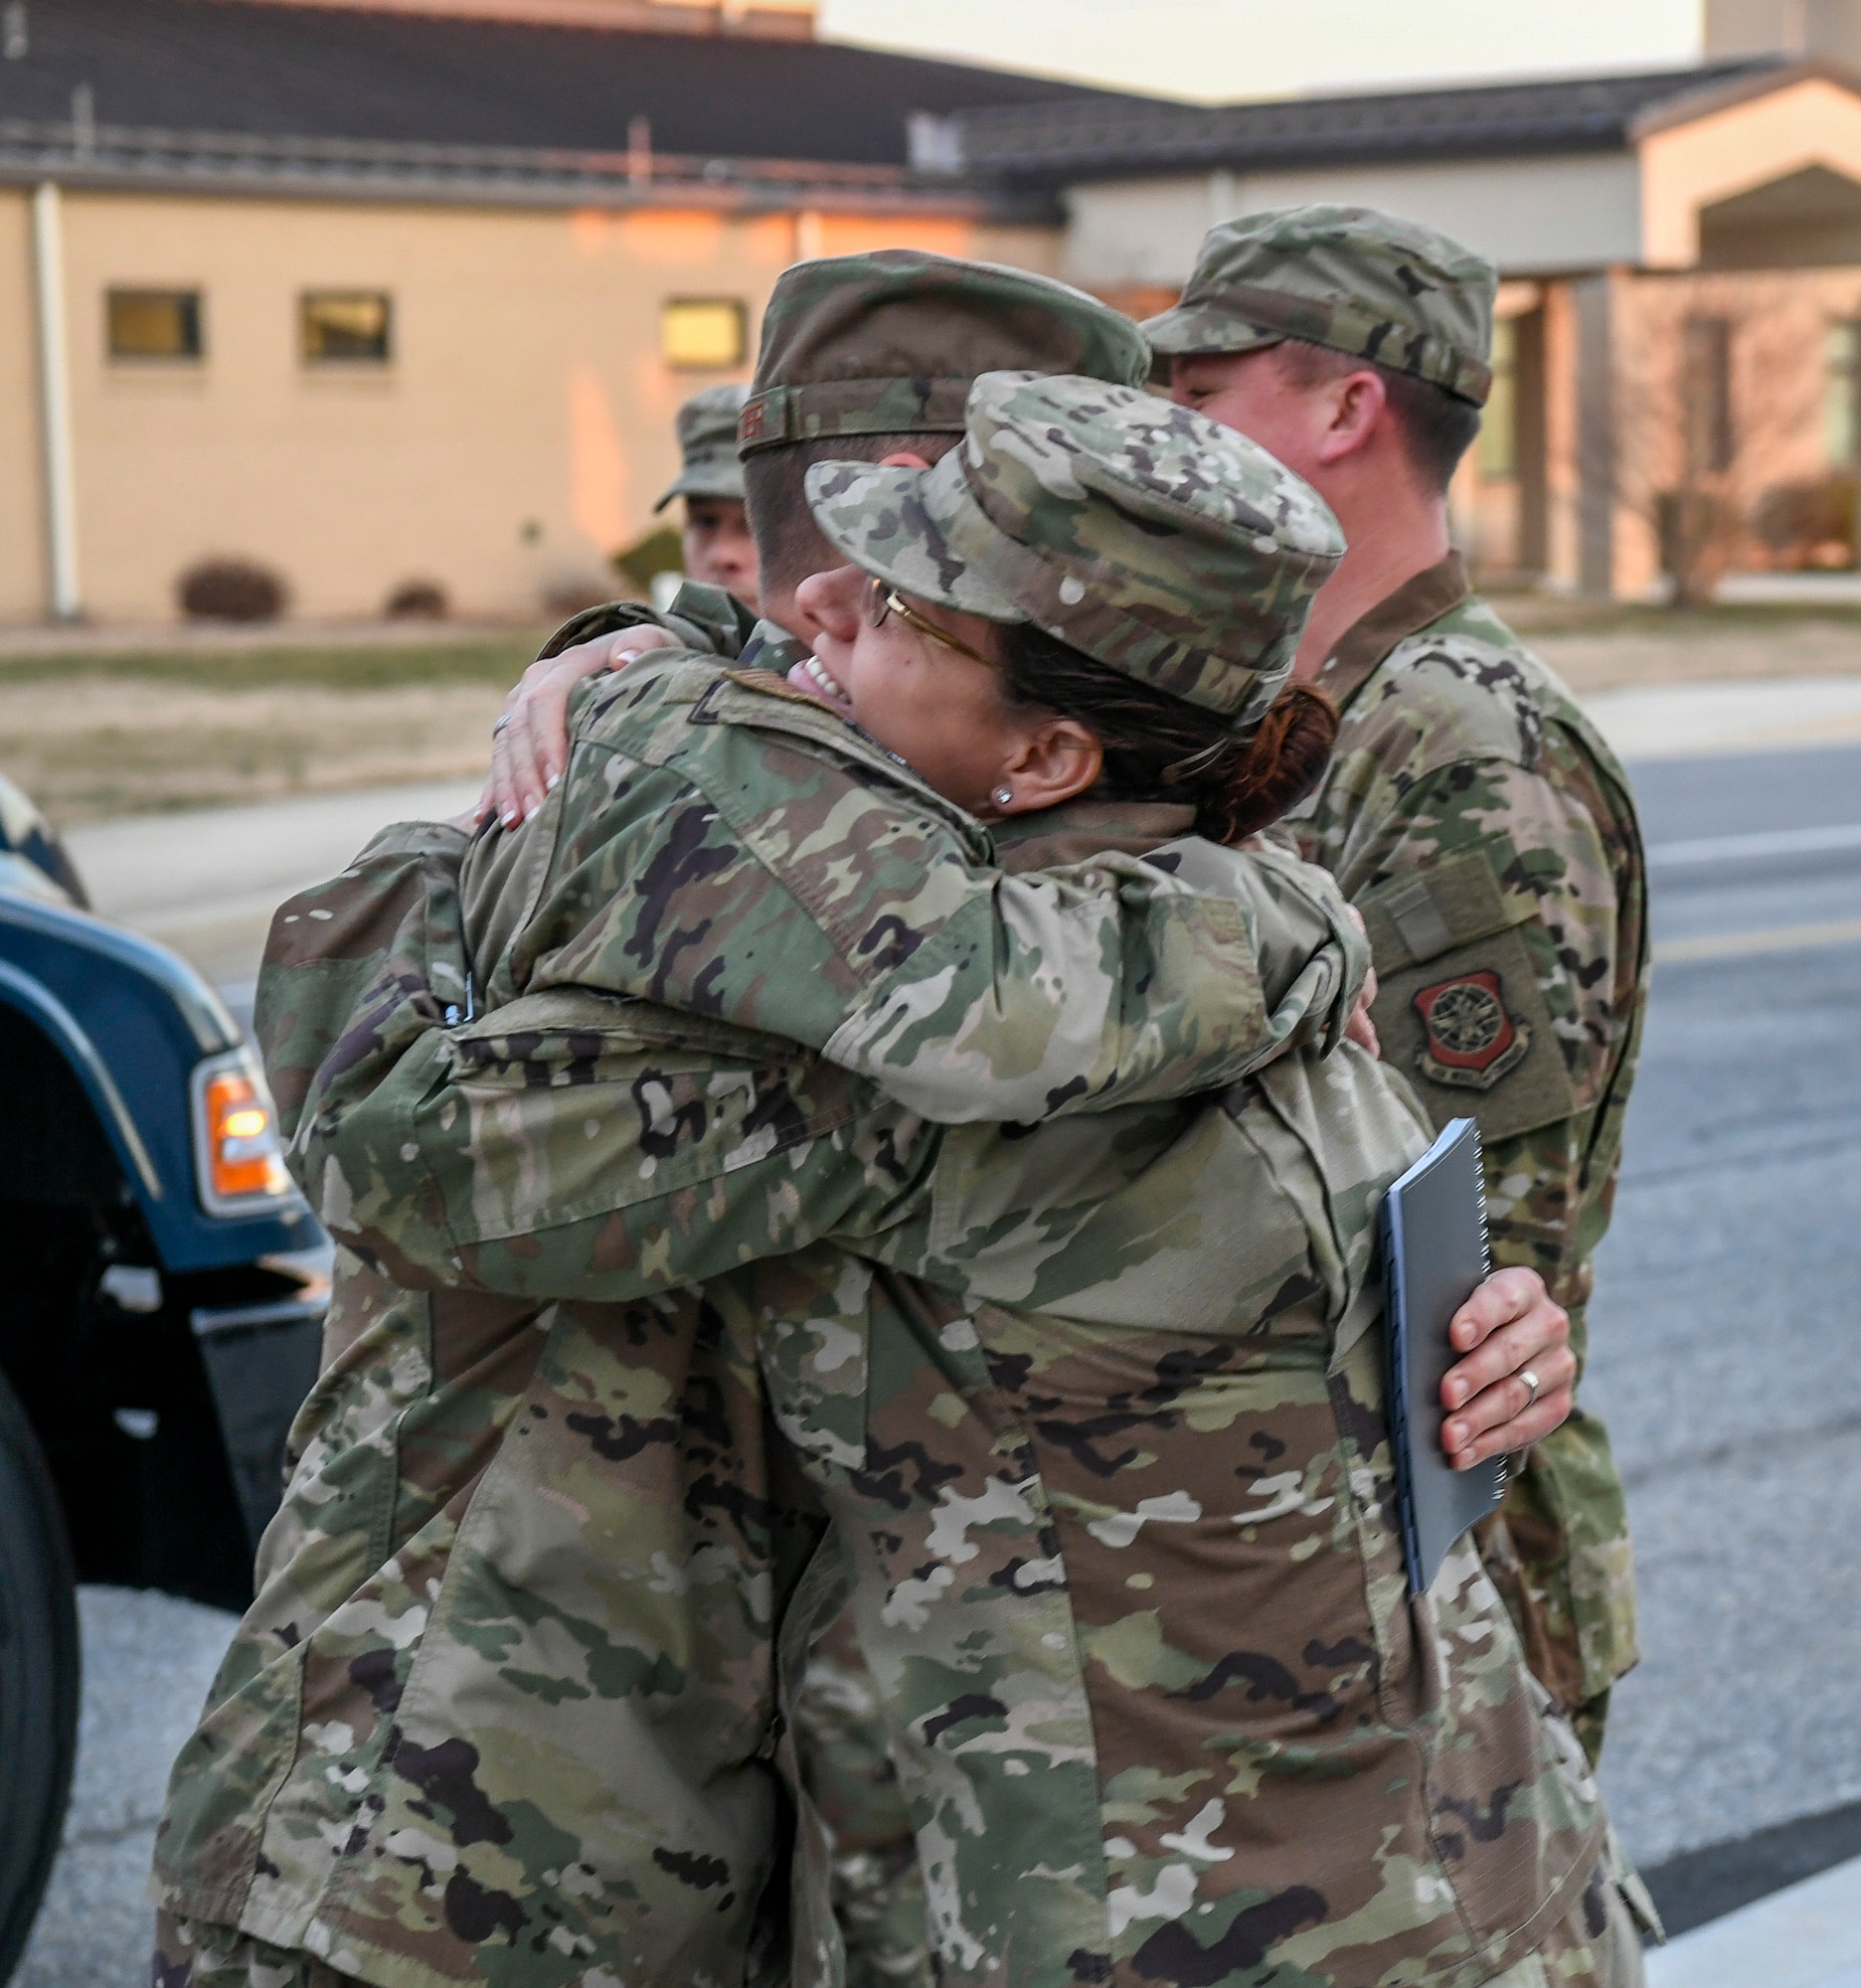 Chief Master Sgt. Michael Pelletier, 618th Air Operations Center command chief, and Chief Master Sgt. Shae Gee, 436th Airlift Wing command chief, greet each other Jan. 24, 2020, at Dover Air Force Base, Del. Gee was excited to see an old friend, Pelletier. (U.S. Air Force photo by Senior Airman Christopher Quail)